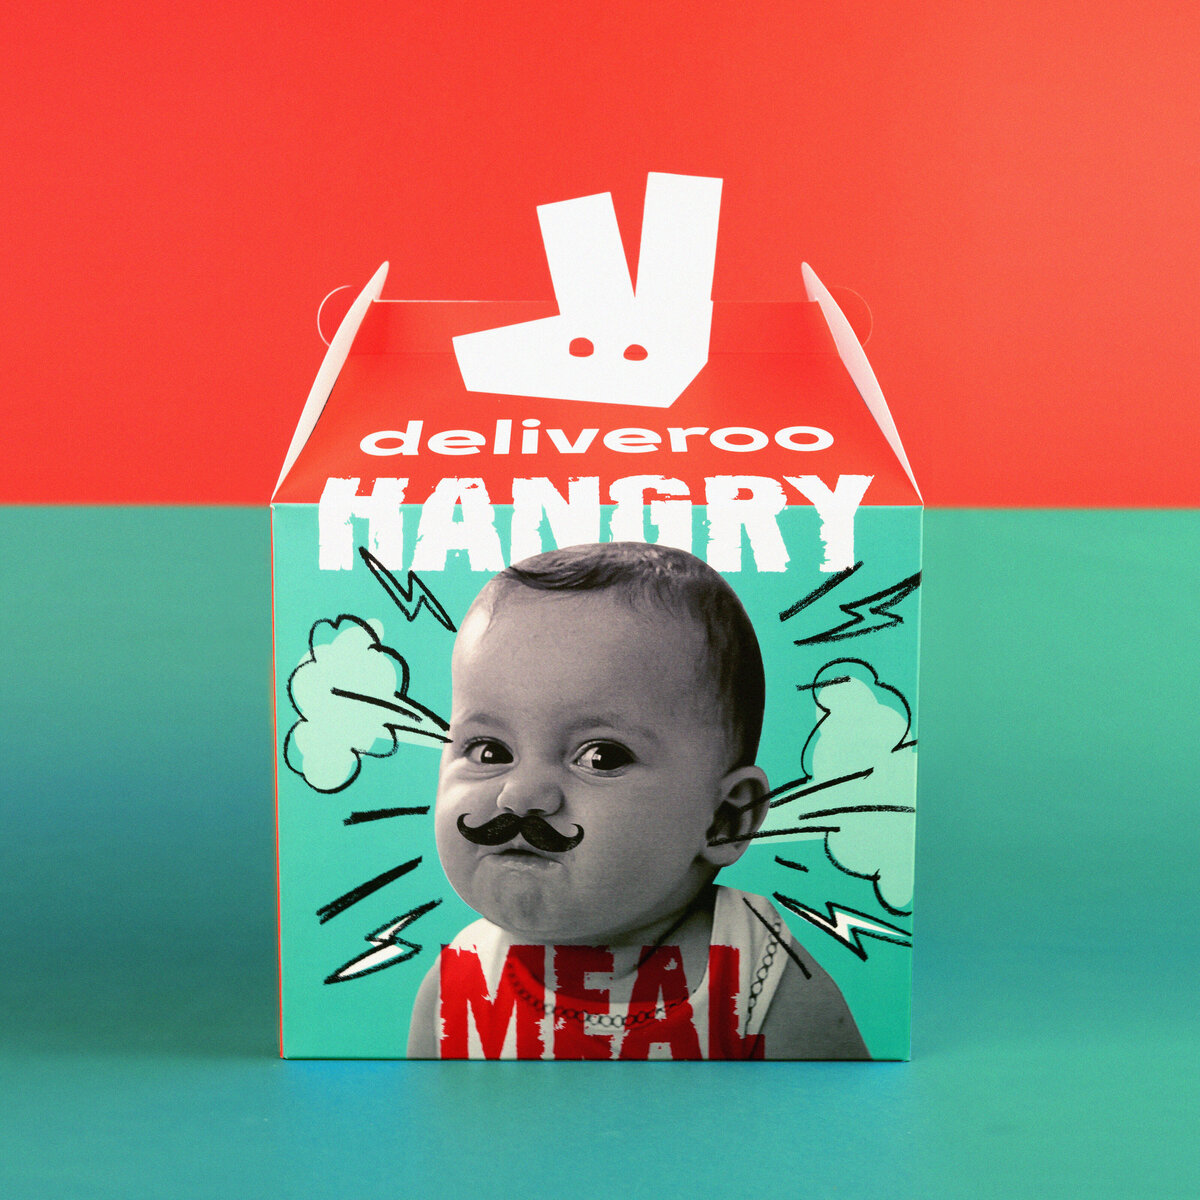 Deliveroo (Hangry) Influencer Kit